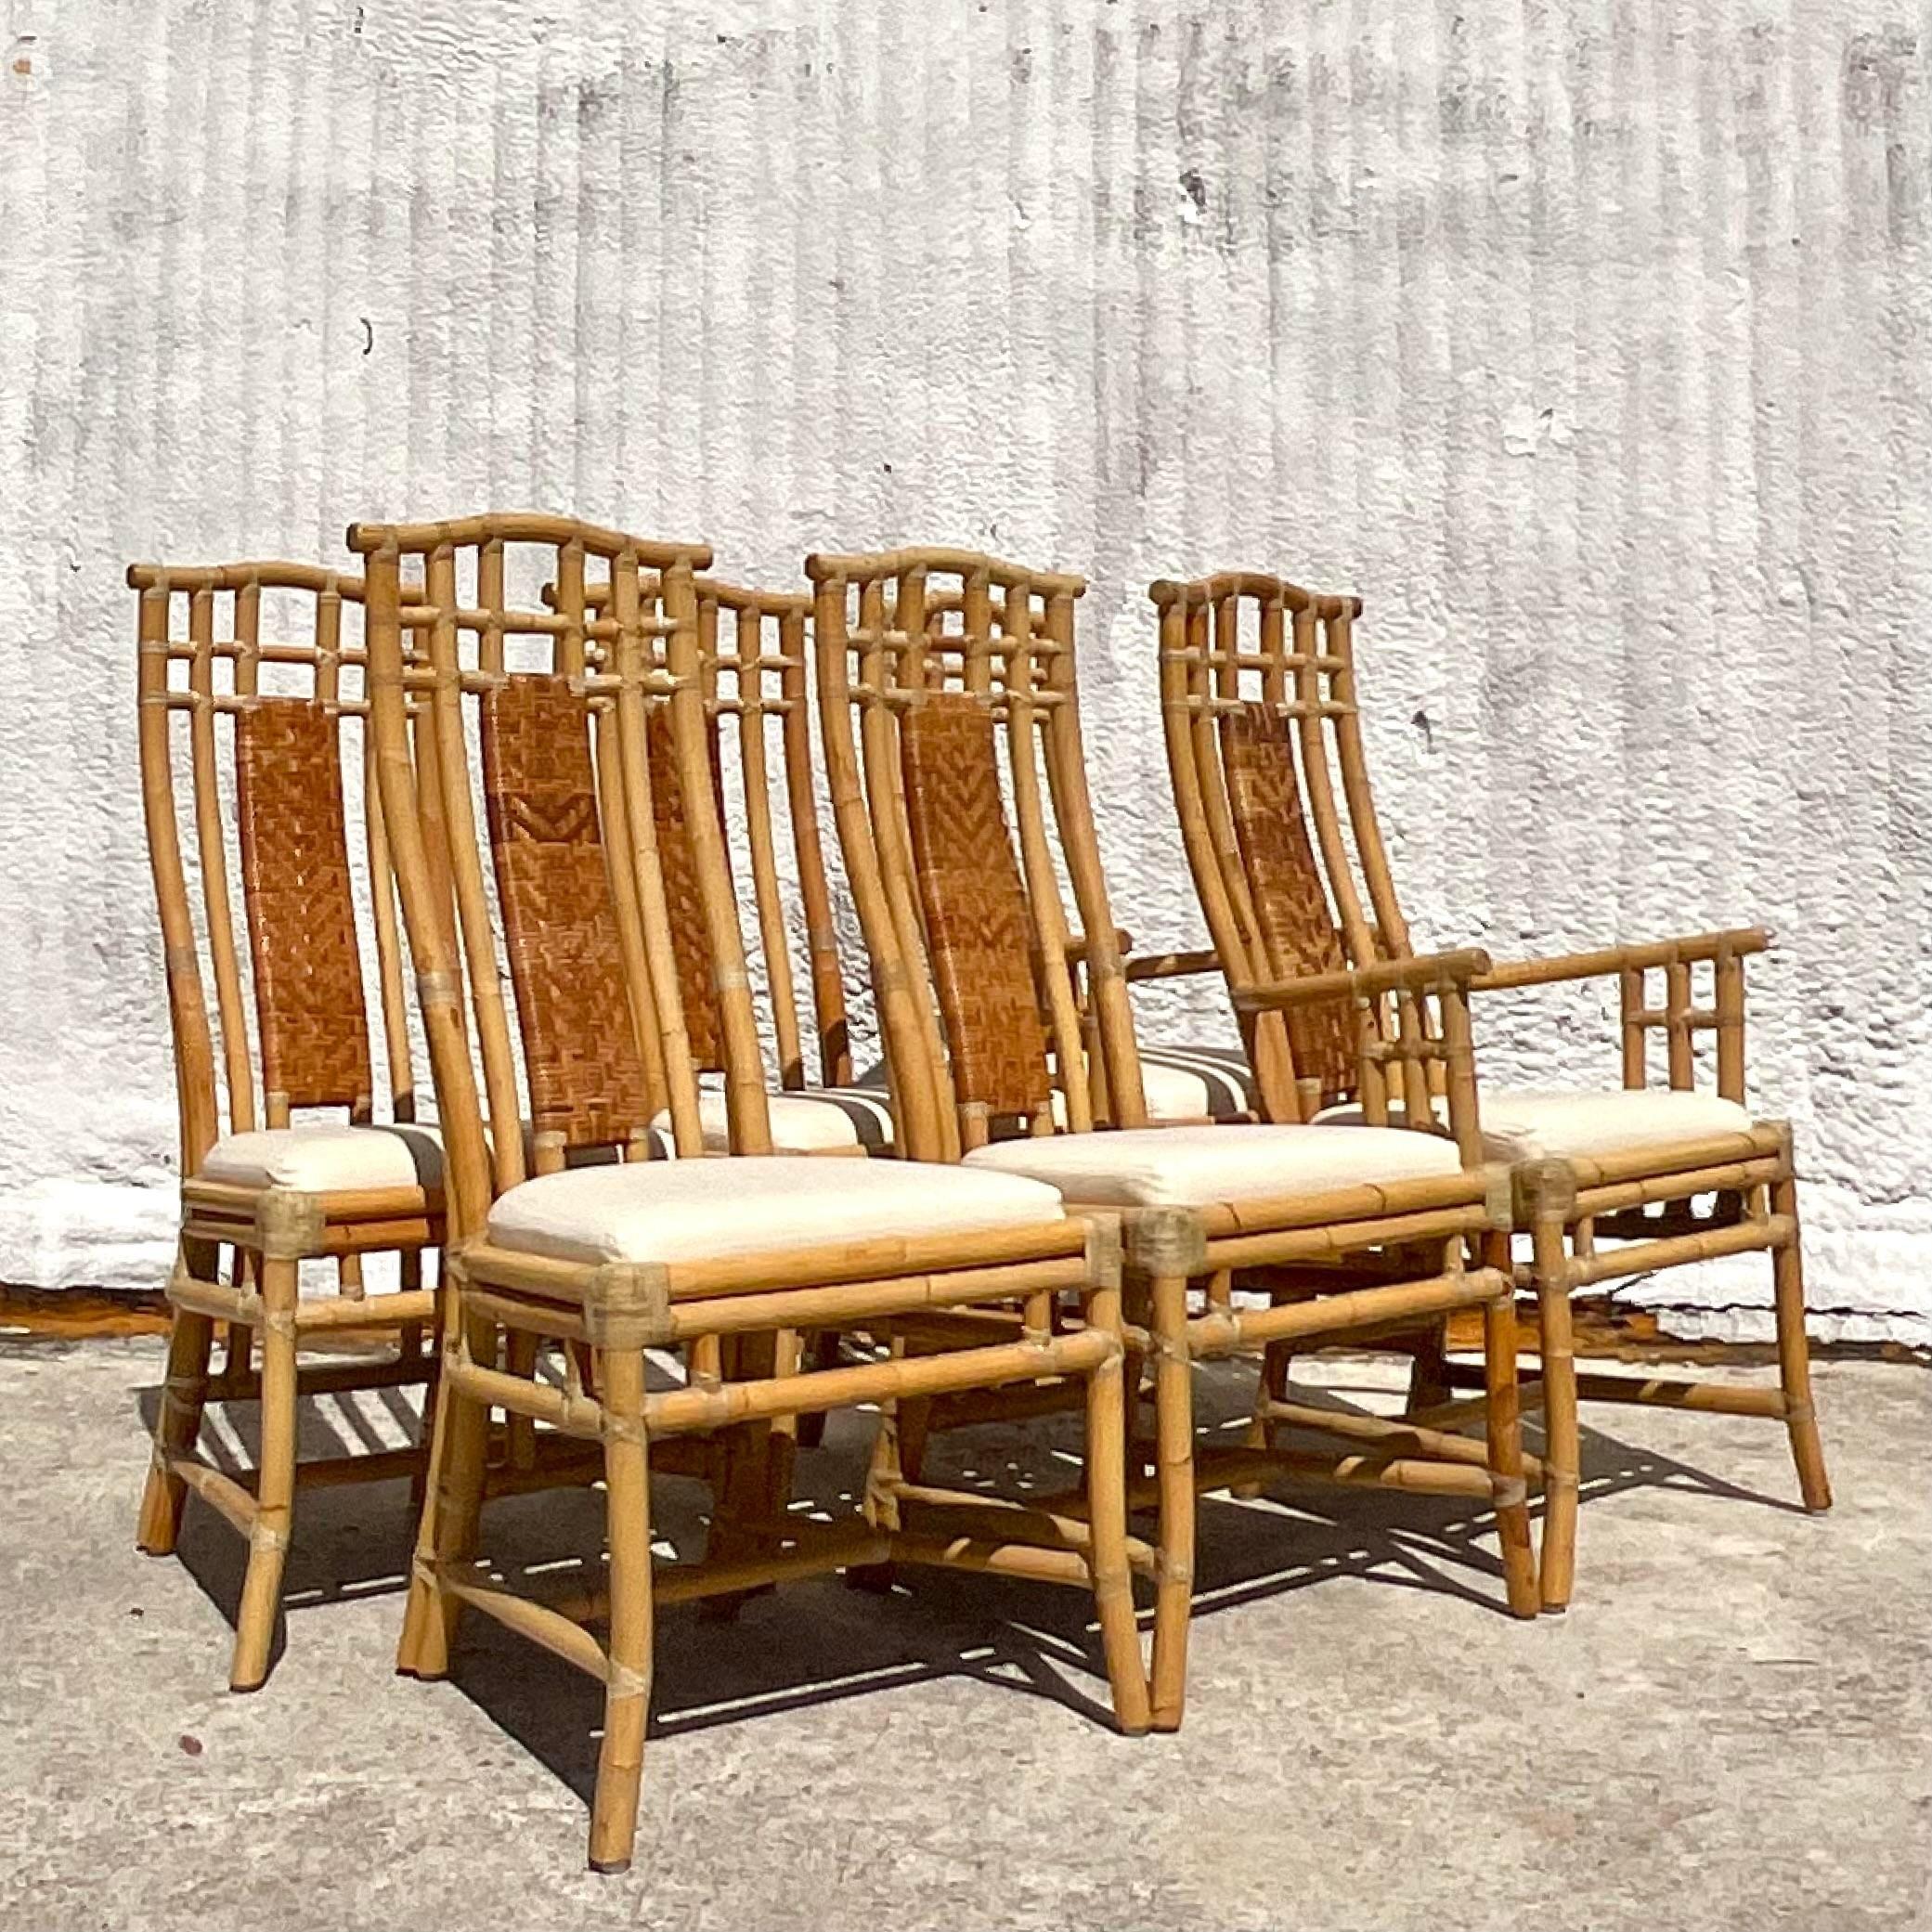 20th Century Vintage Coastal High Back Woven Rattan Chairs - Set of 6 For Sale